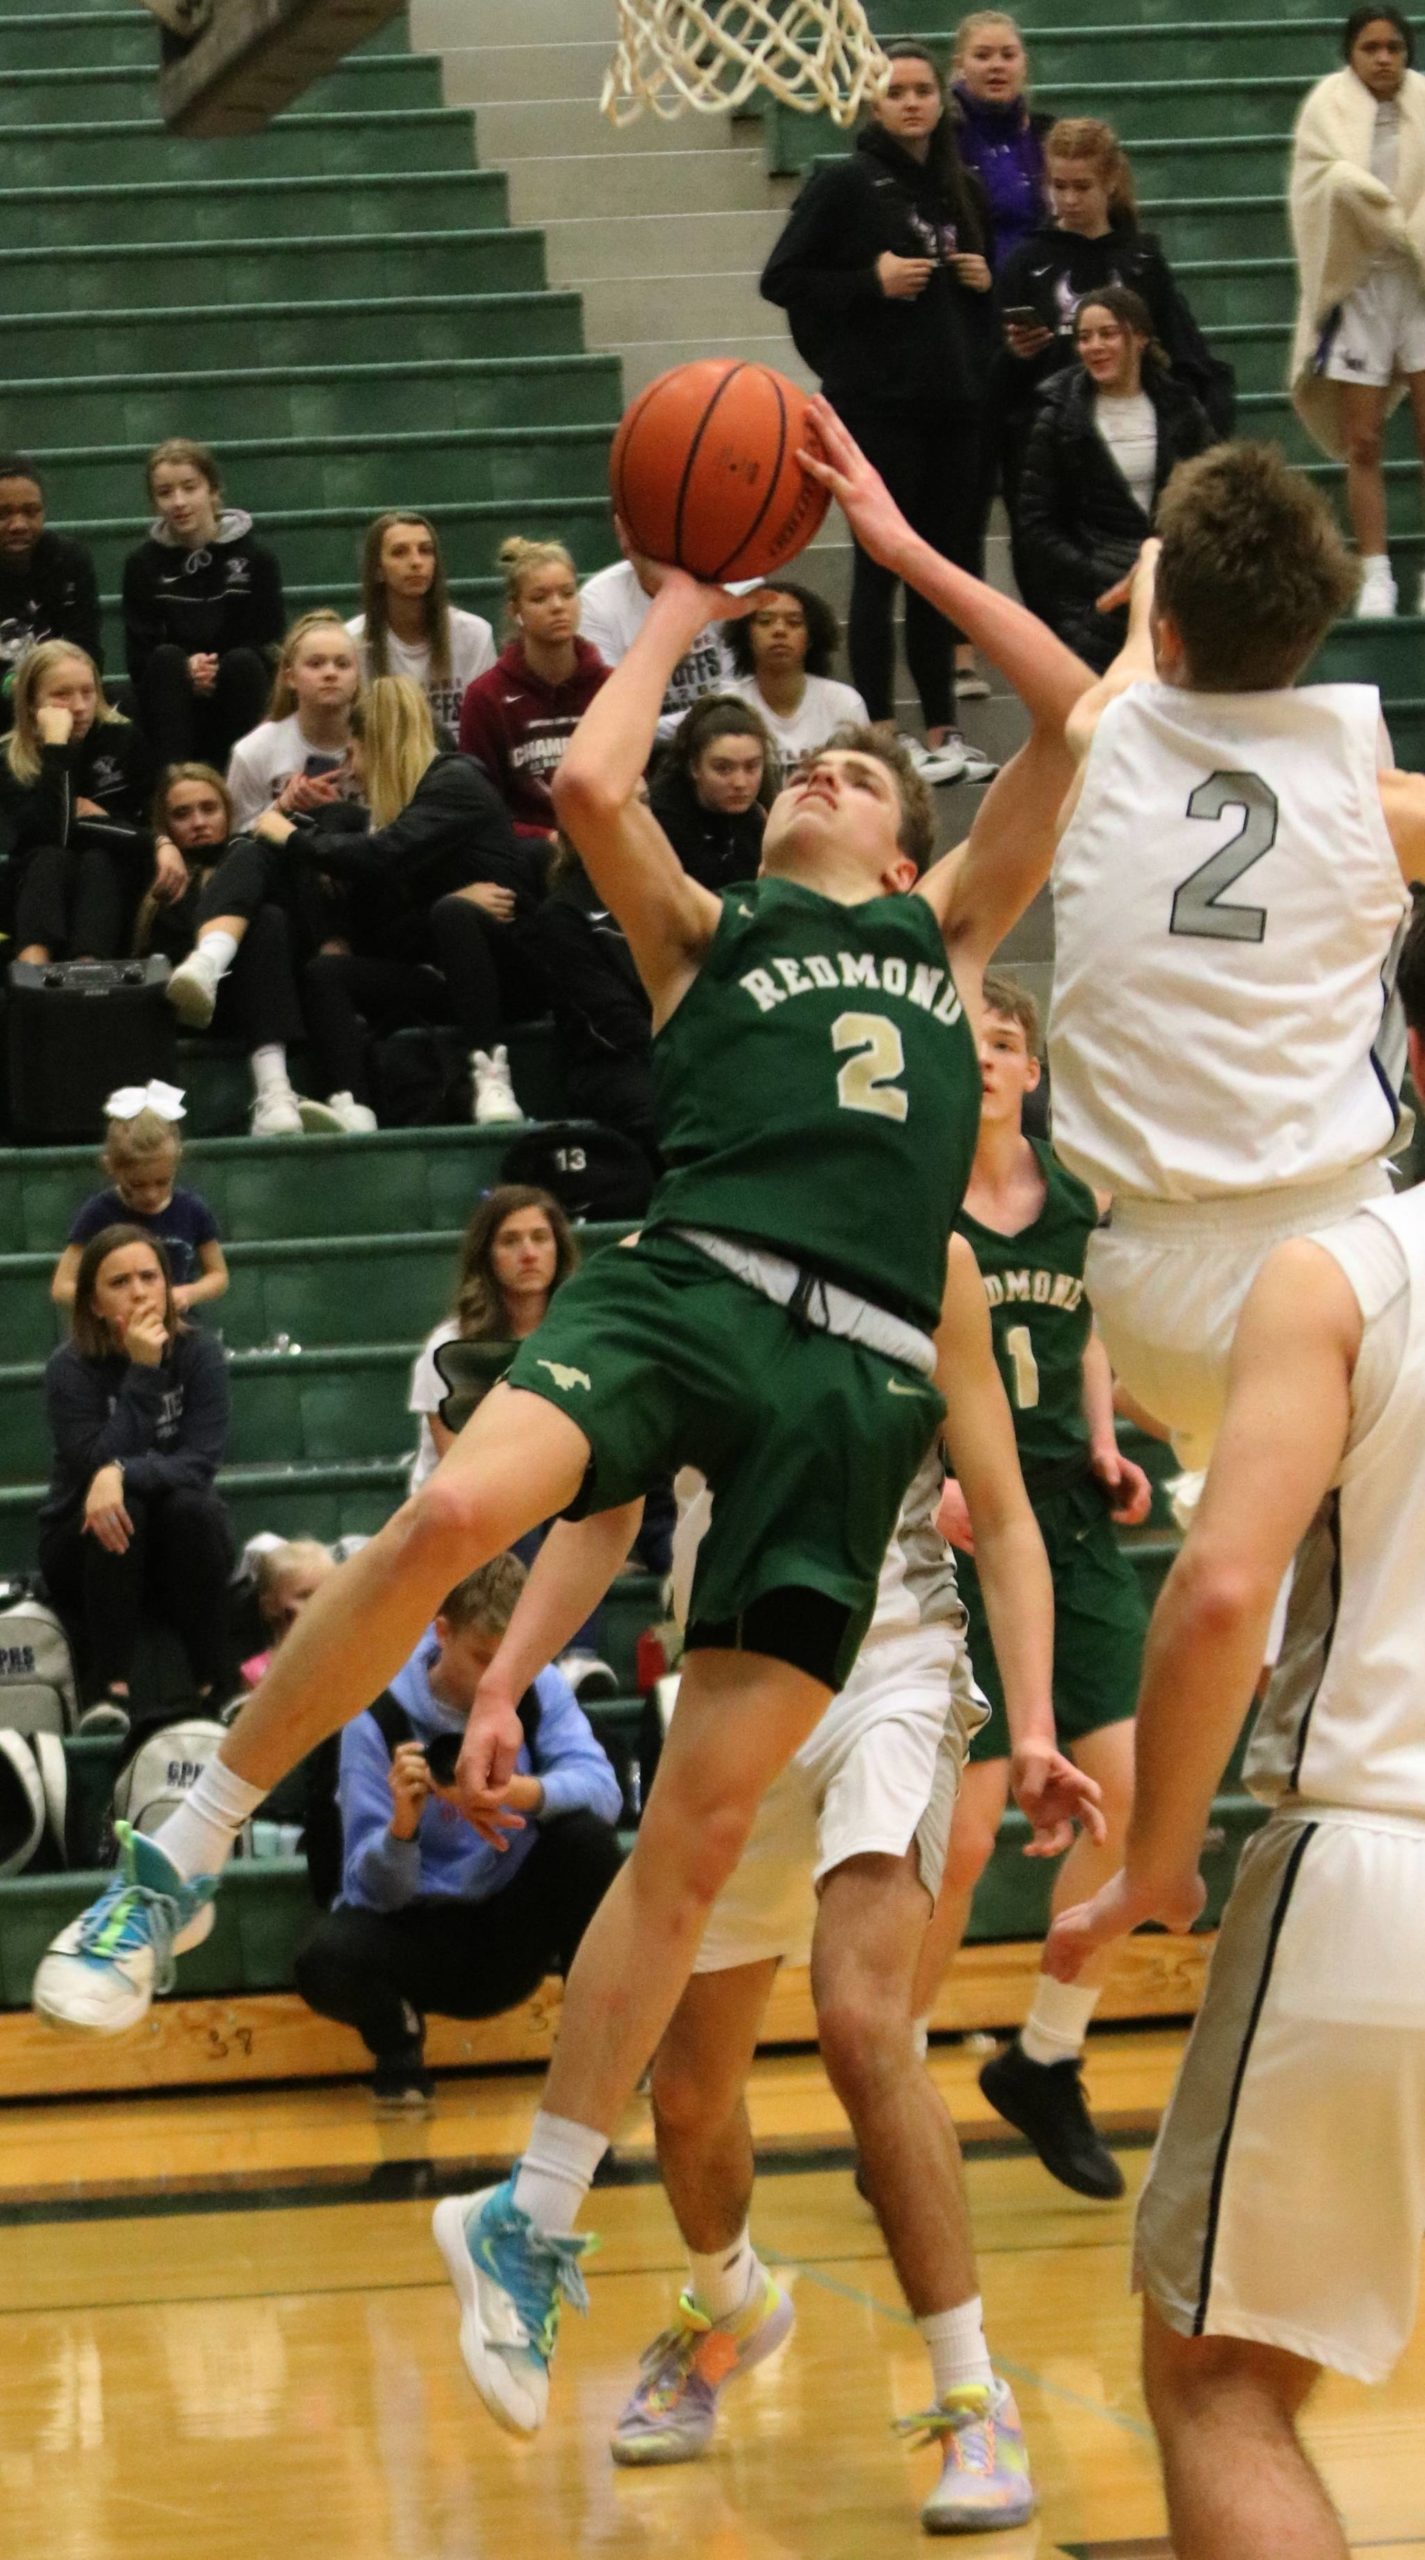 Redmond’s Nathan Miller drives to the hoop. Andy Nystrom/ staff photo